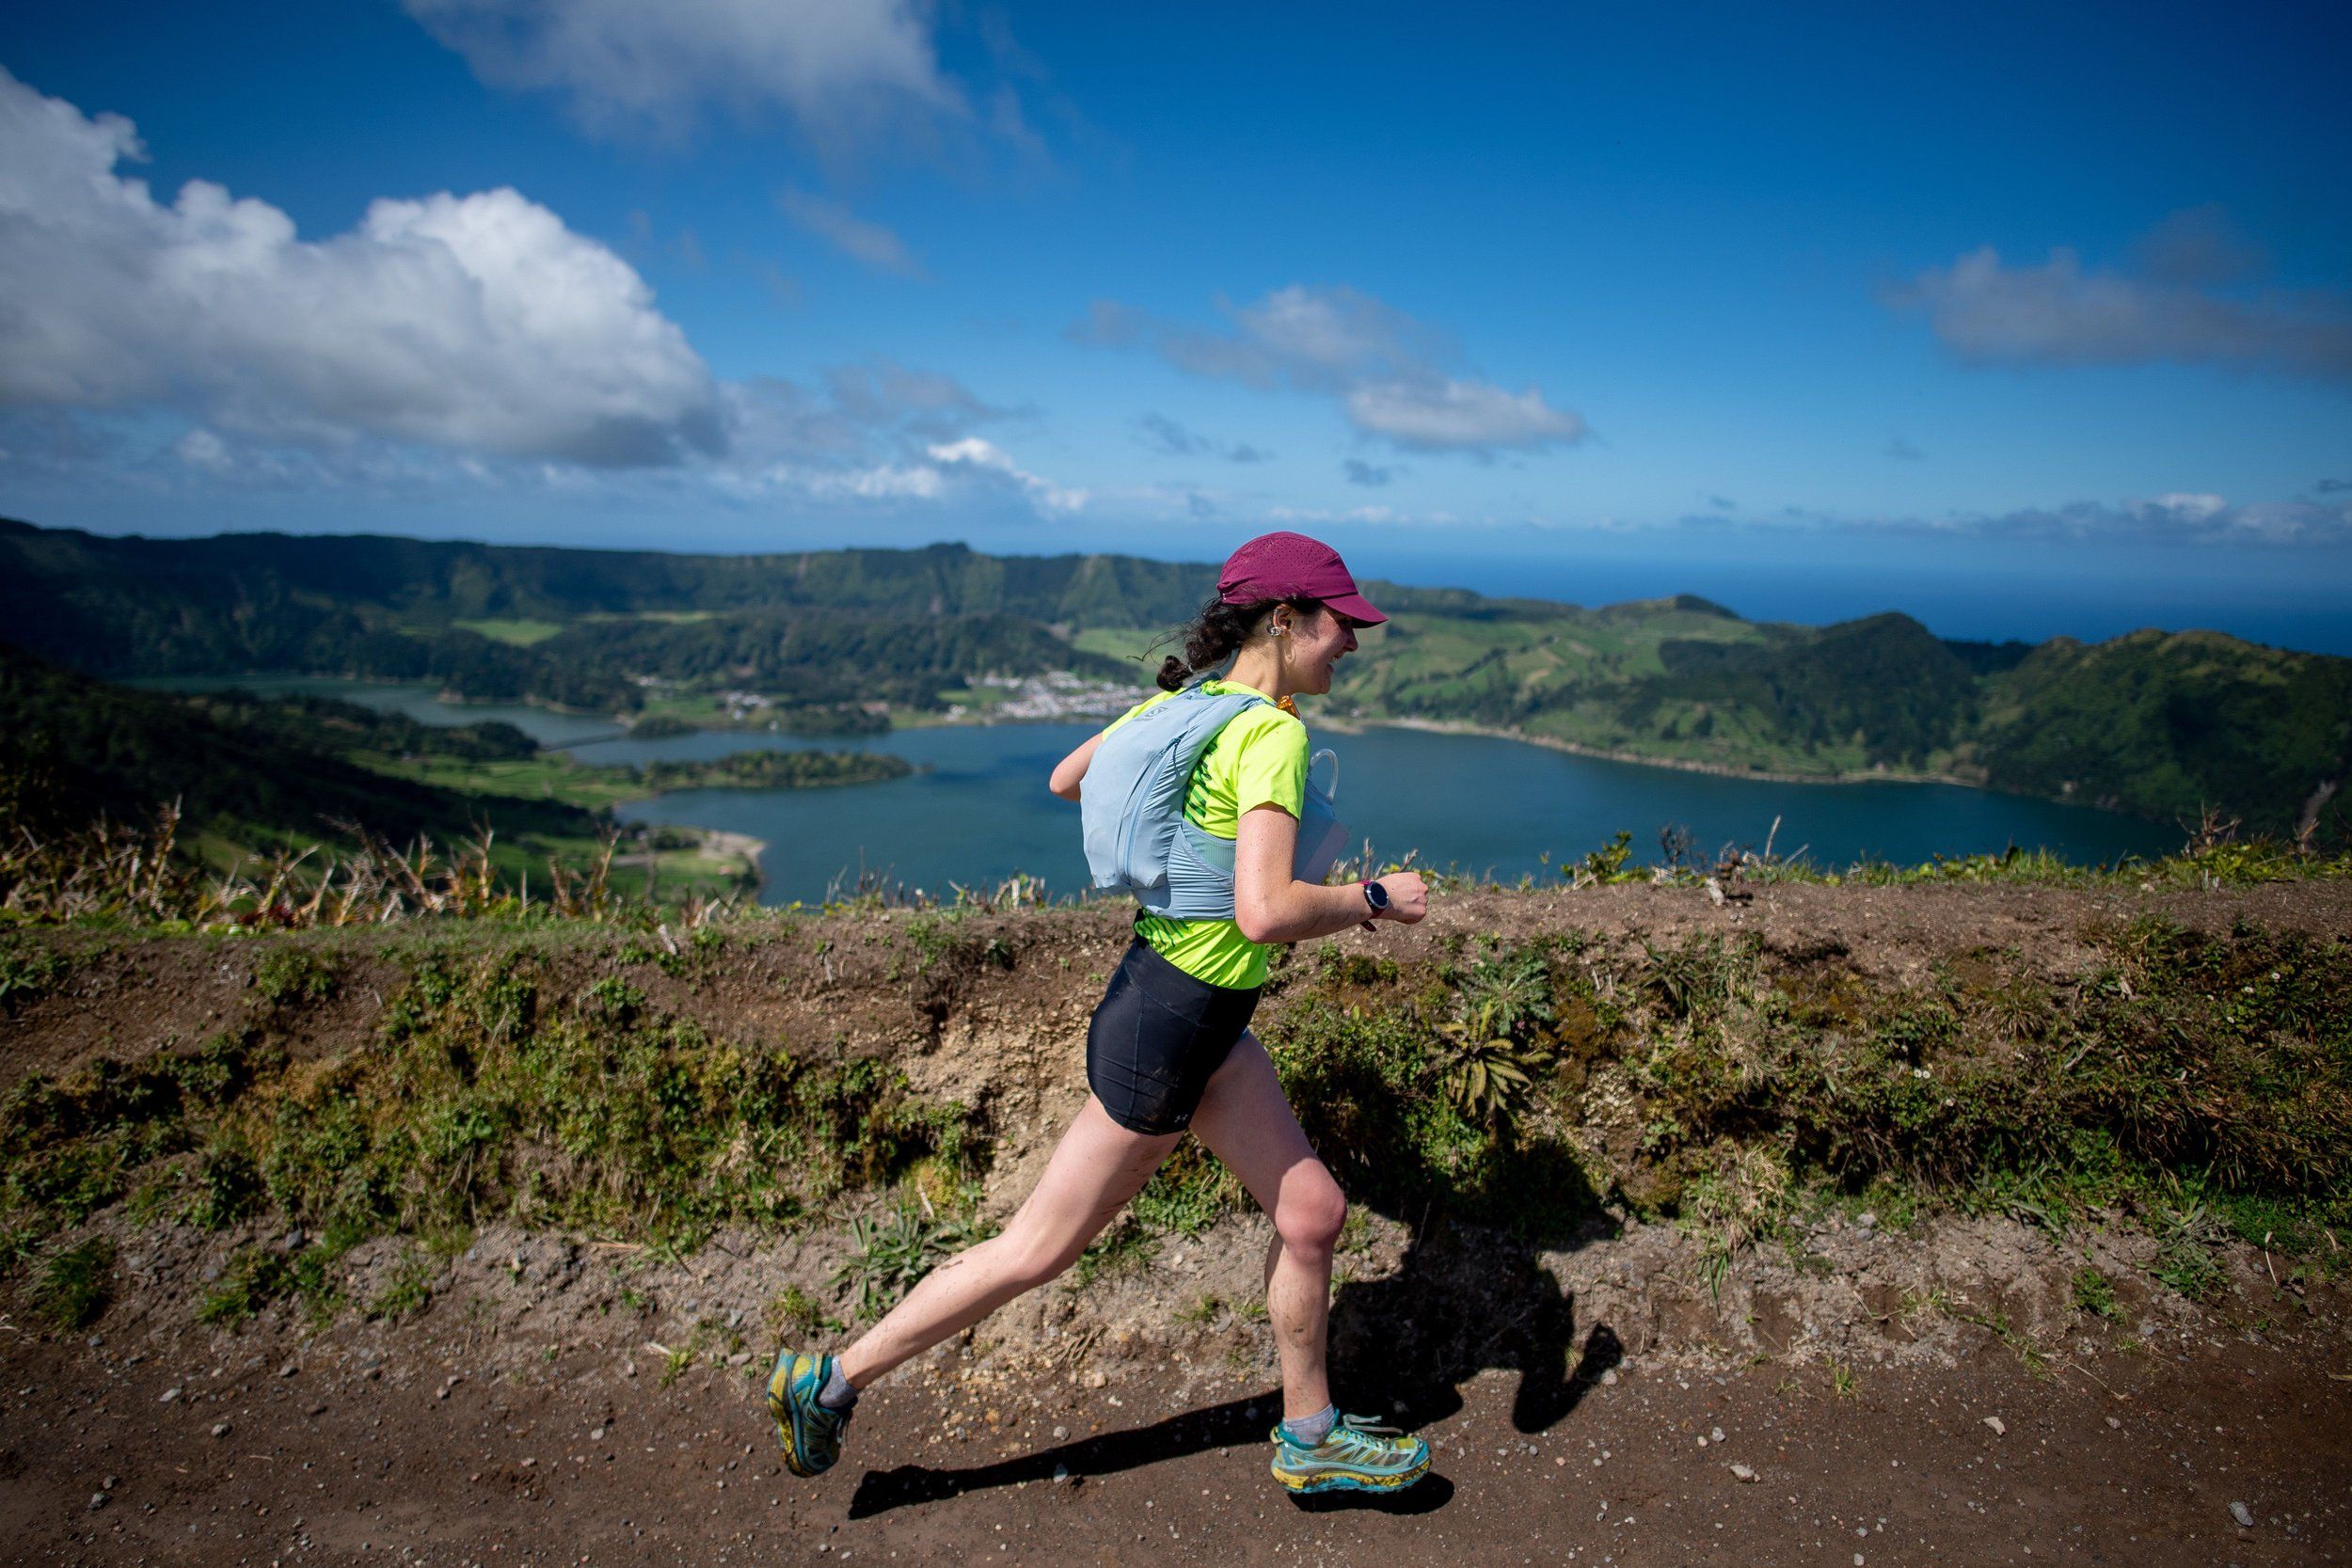 Ultra X Azores offer participants 360 views of this beautiful volcanic island